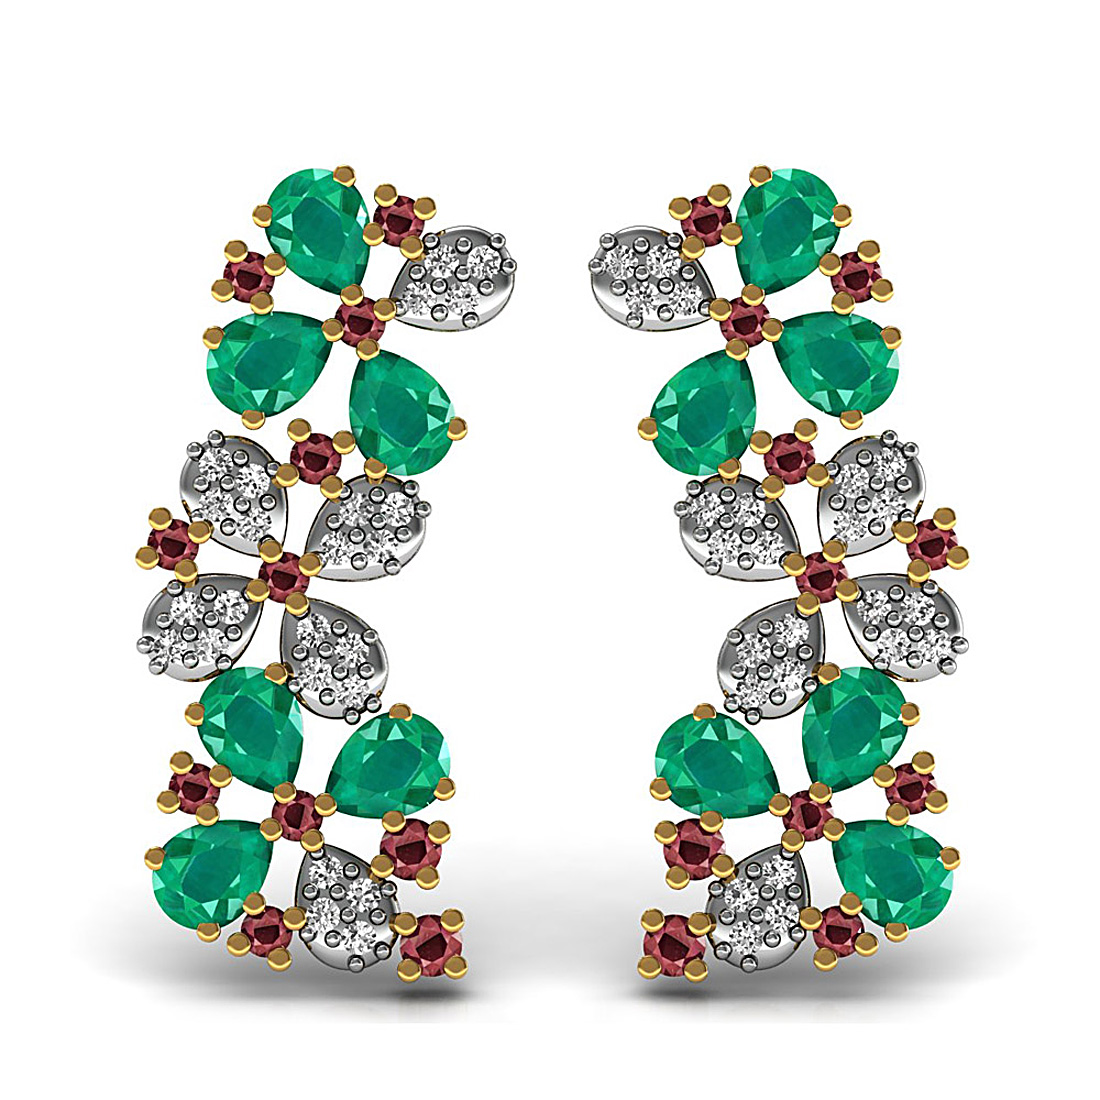 Natural emerald and ruby gemstone long stud earrings made in 18k solid yellow gold.